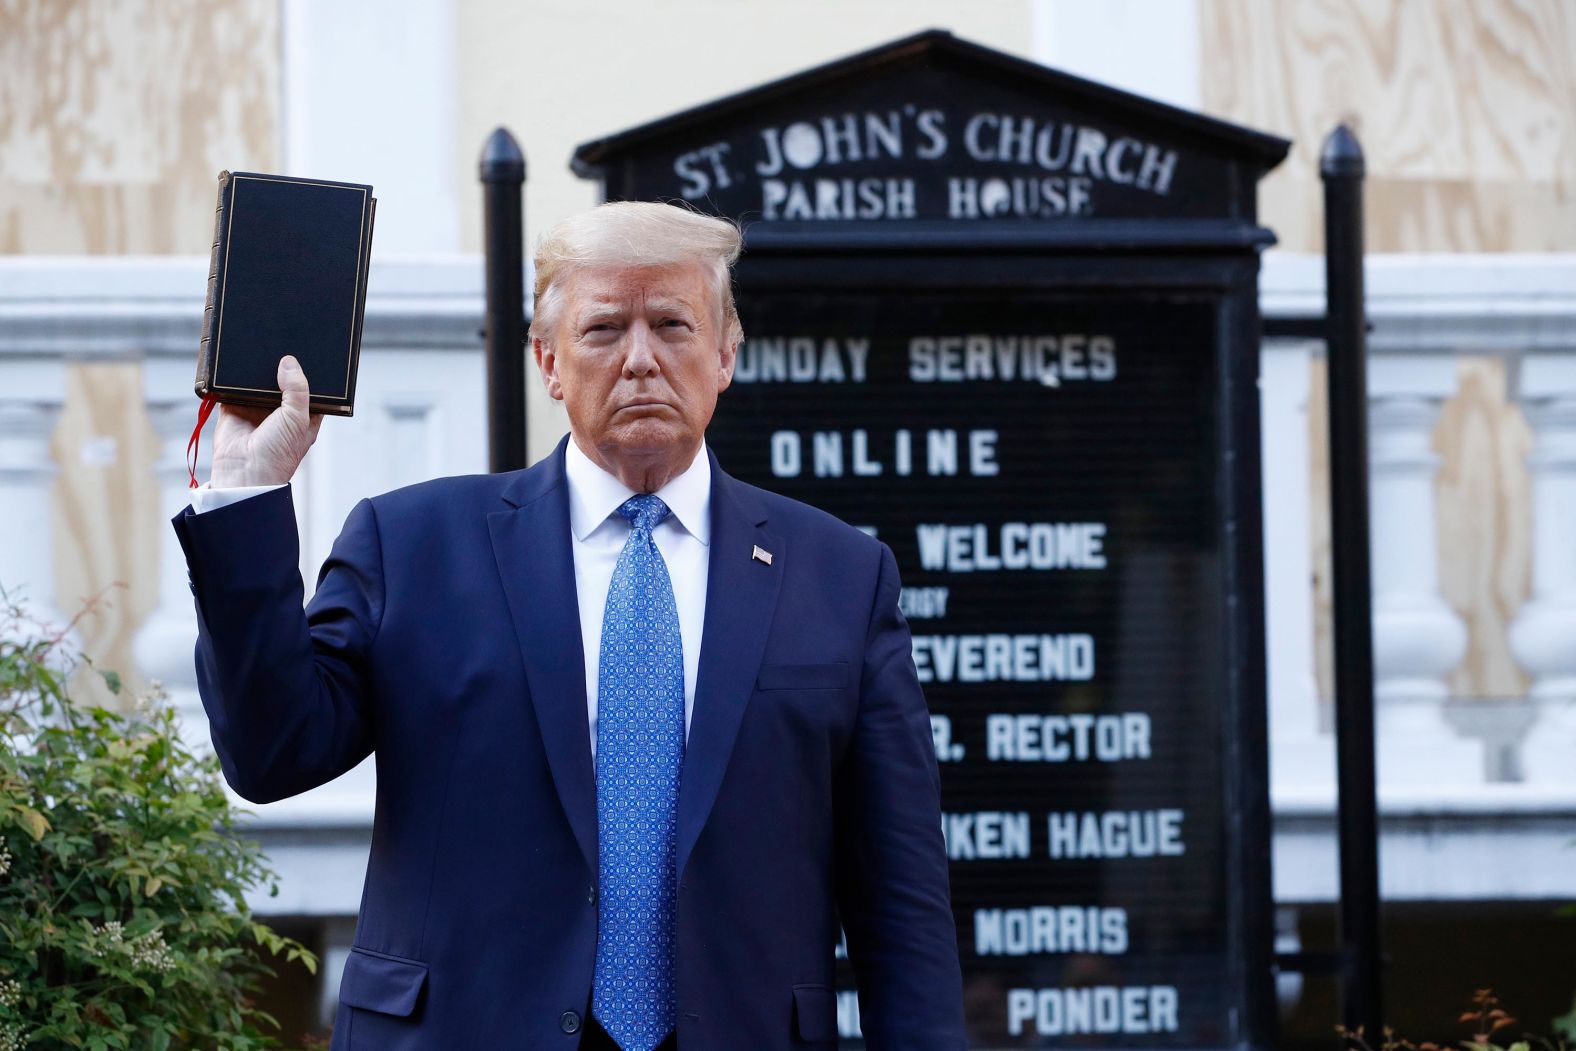 Trump holds a Bible outside St. John's Episcopal Church during a <a href="index.php?page=&url=https%3A%2F%2Fwww.cnn.com%2Fvideos%2Fpolitics%2F2020%2F06%2F02%2Fmariann-budde-bishop-st-johns-trump-bible-photo-ac360-vpx.cnn" target="_blank">photo op</a> in Washington, DC, in June 2020. Part of the church was set on fire during protests the night before. Before Trump's photo op, police cleared out peaceful protesters with rubber bullets, tear gas and flash bangs.